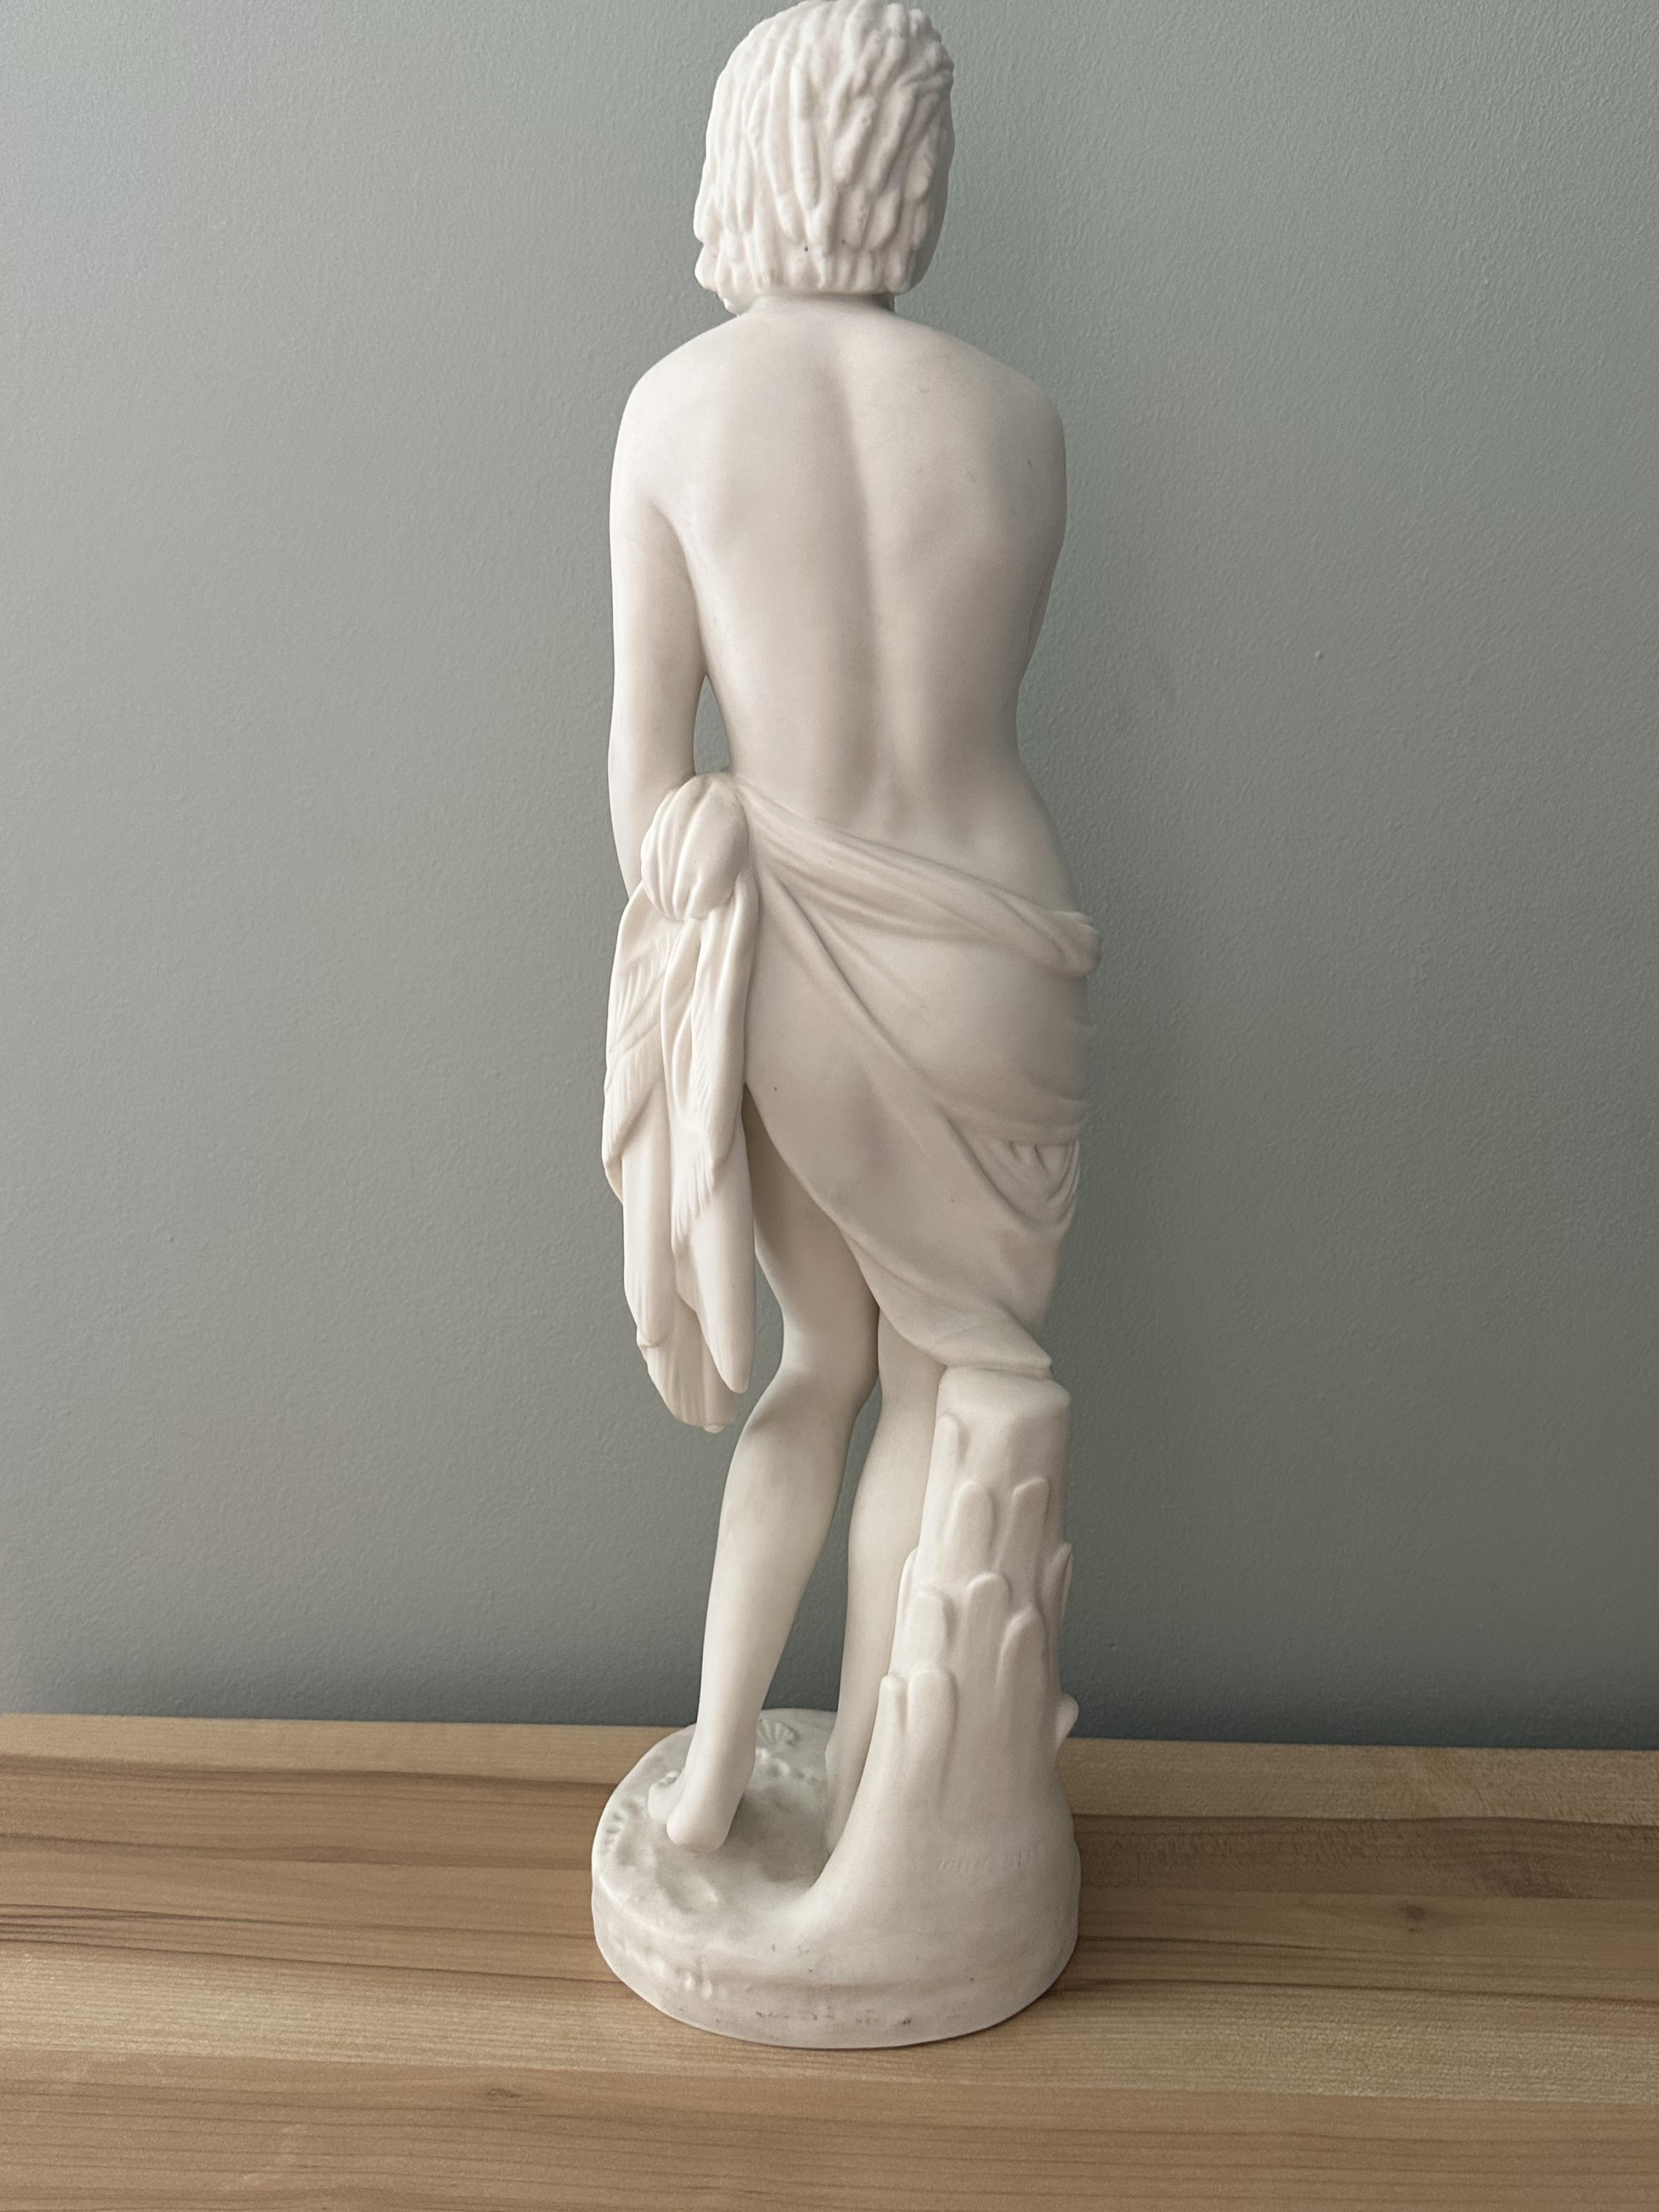 Parian Ware Minton Sculpture by John Bell. One ha - Image 6 of 16